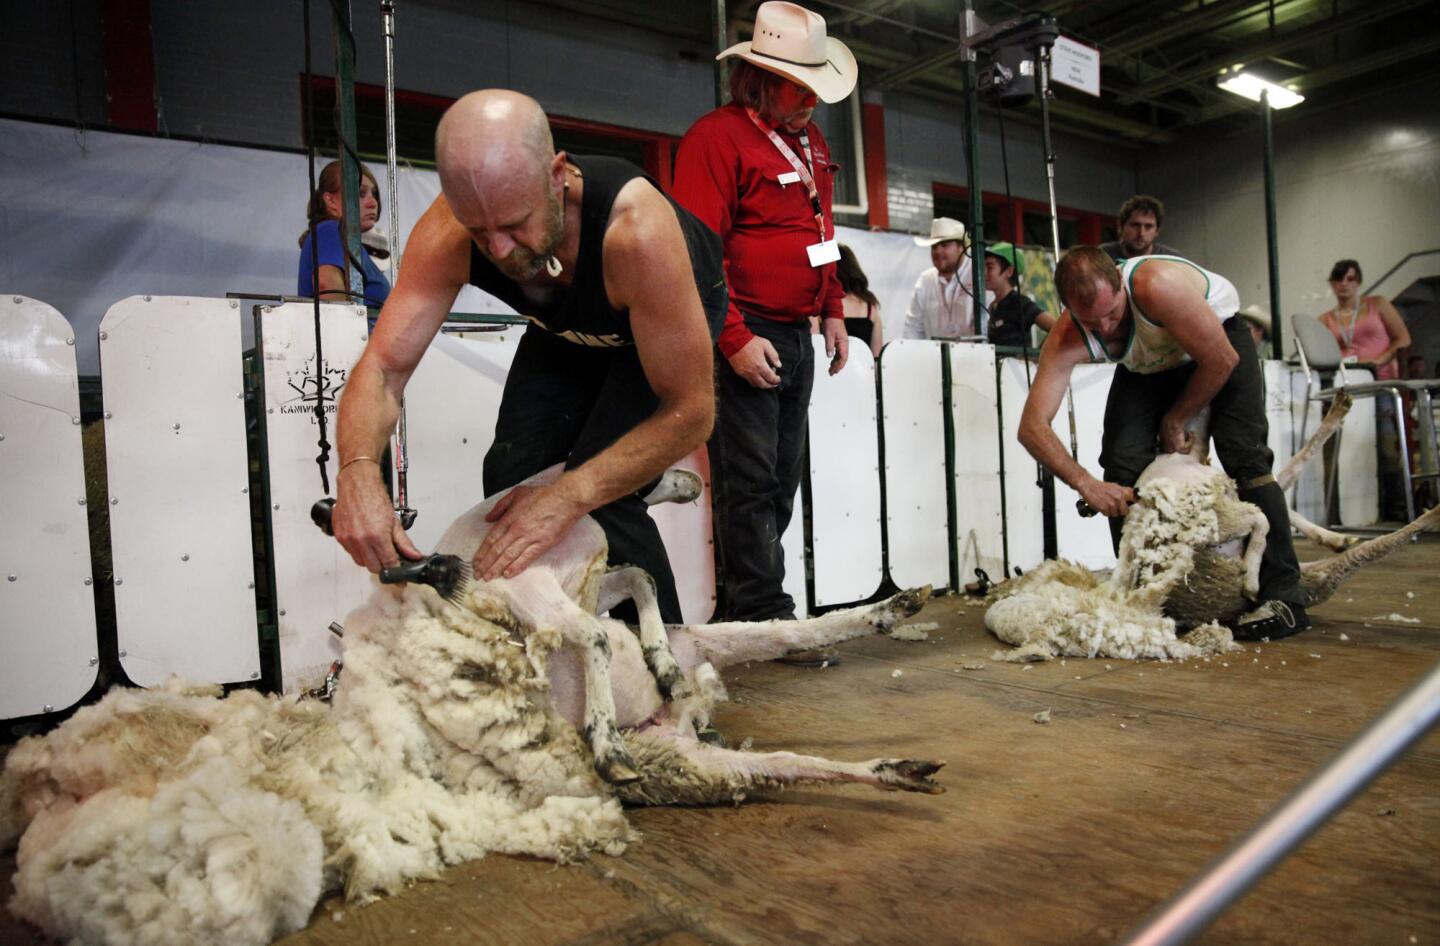 Besides parades, rodeo events and unhealthy food, the Calgary Stampede features sheep shearing. These competitors -- including the well-shorn pair in the foreground -- were part of the opening weekend in 2013.